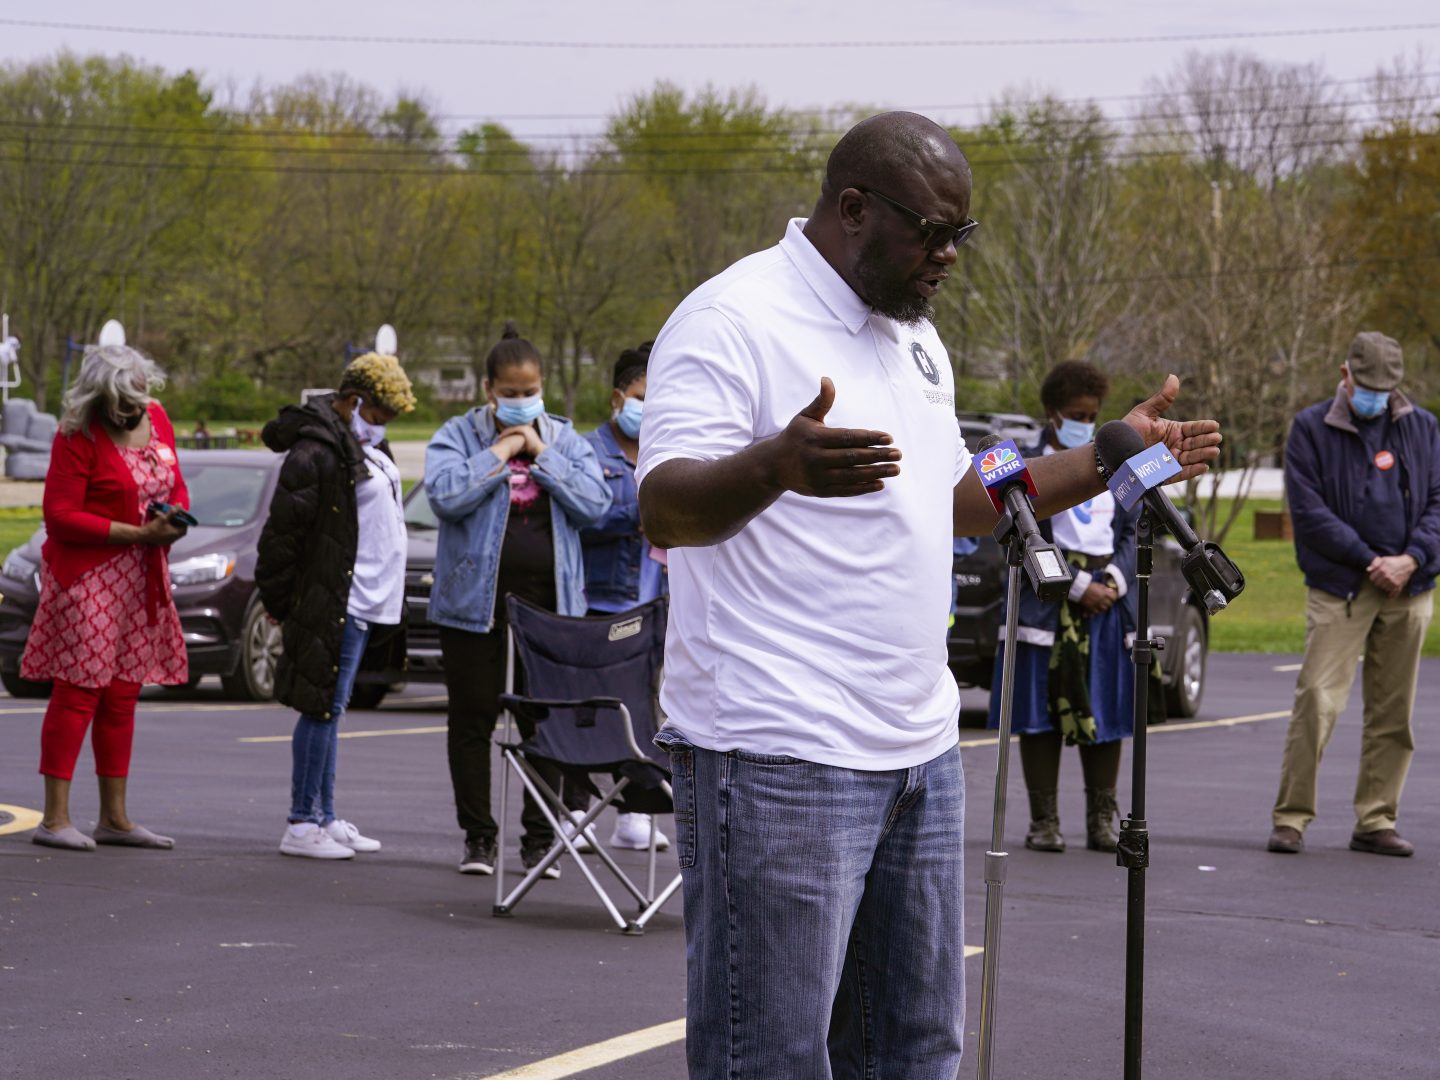 Pastor Denell Howard of the Olivet Missionary Baptist Church leads a prayer at a vigil in Indianapolis, Saturday, April 17, 2021 for the victims of the shooting at a FedEx facility. A gunman killed eight people and wounded several others before taking his own life in a late-night attack at a FedEx facility near the Indianapolis airport.  (AP Photo/Michael Conroy)